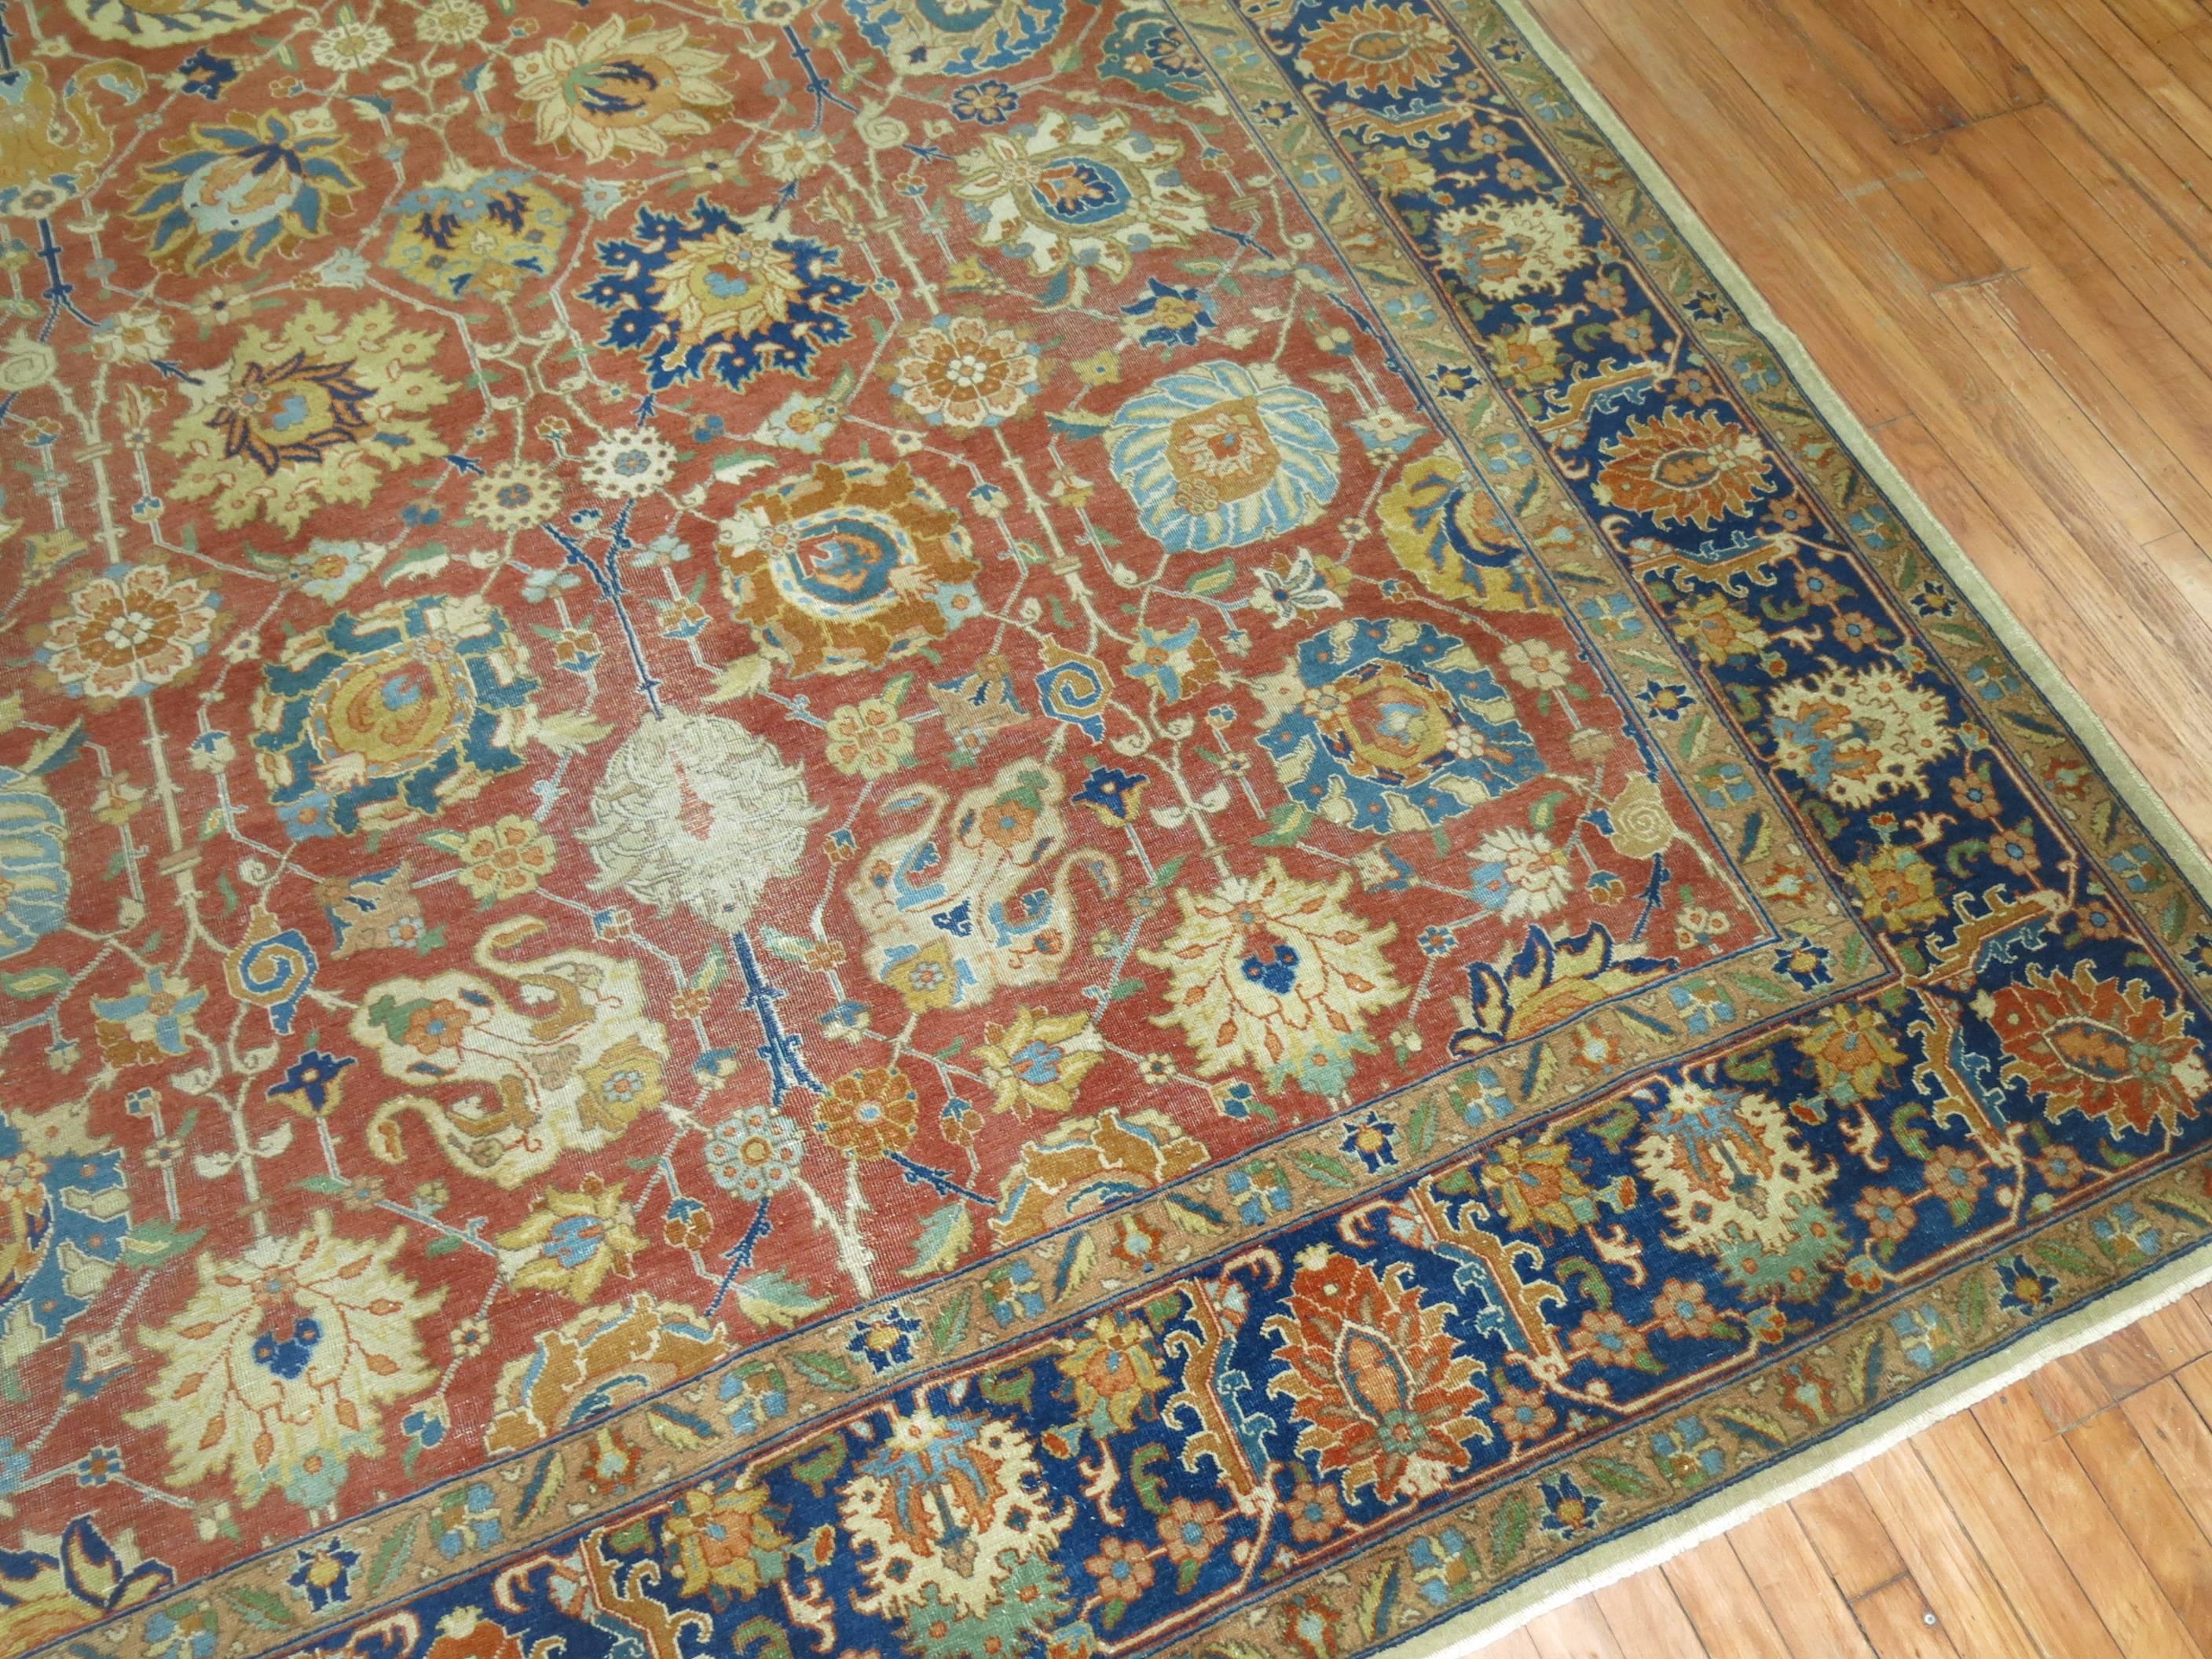 Authentic shabby chic room size Persian Tabriz rug.

8'6'' x 11'3''

An antique Tabriz can be made of cotton or silk and woven as a pile carpet or flat-weave. A refined palette reliant on copper tones, terracotta and ivory, with shades of blue and